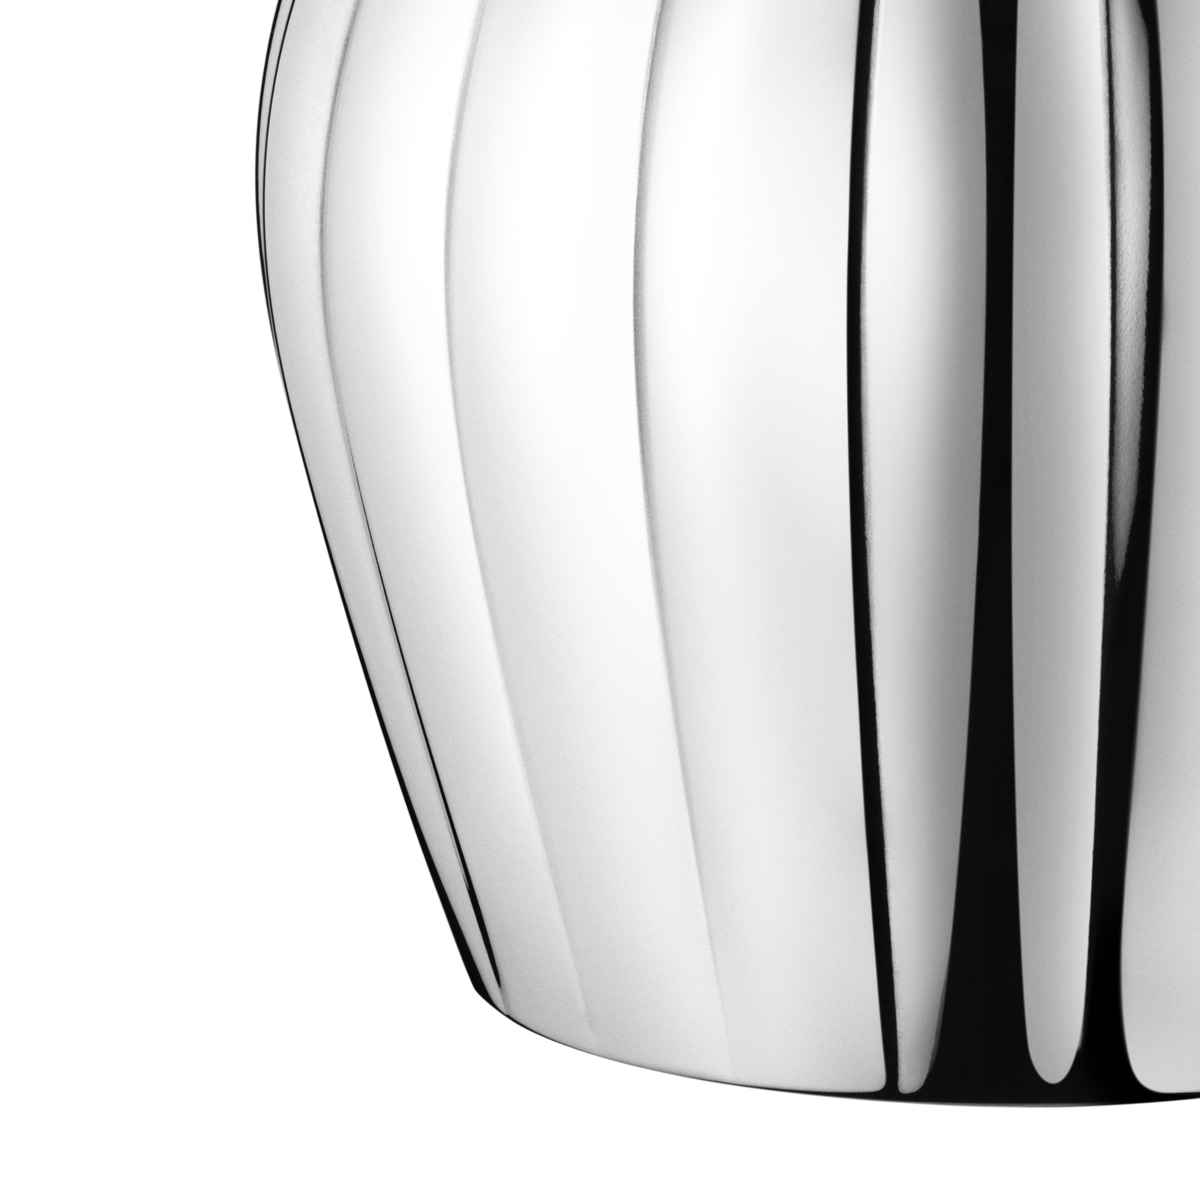 Georg Jensen on X: The #Bernadotte thermo jug is a unique